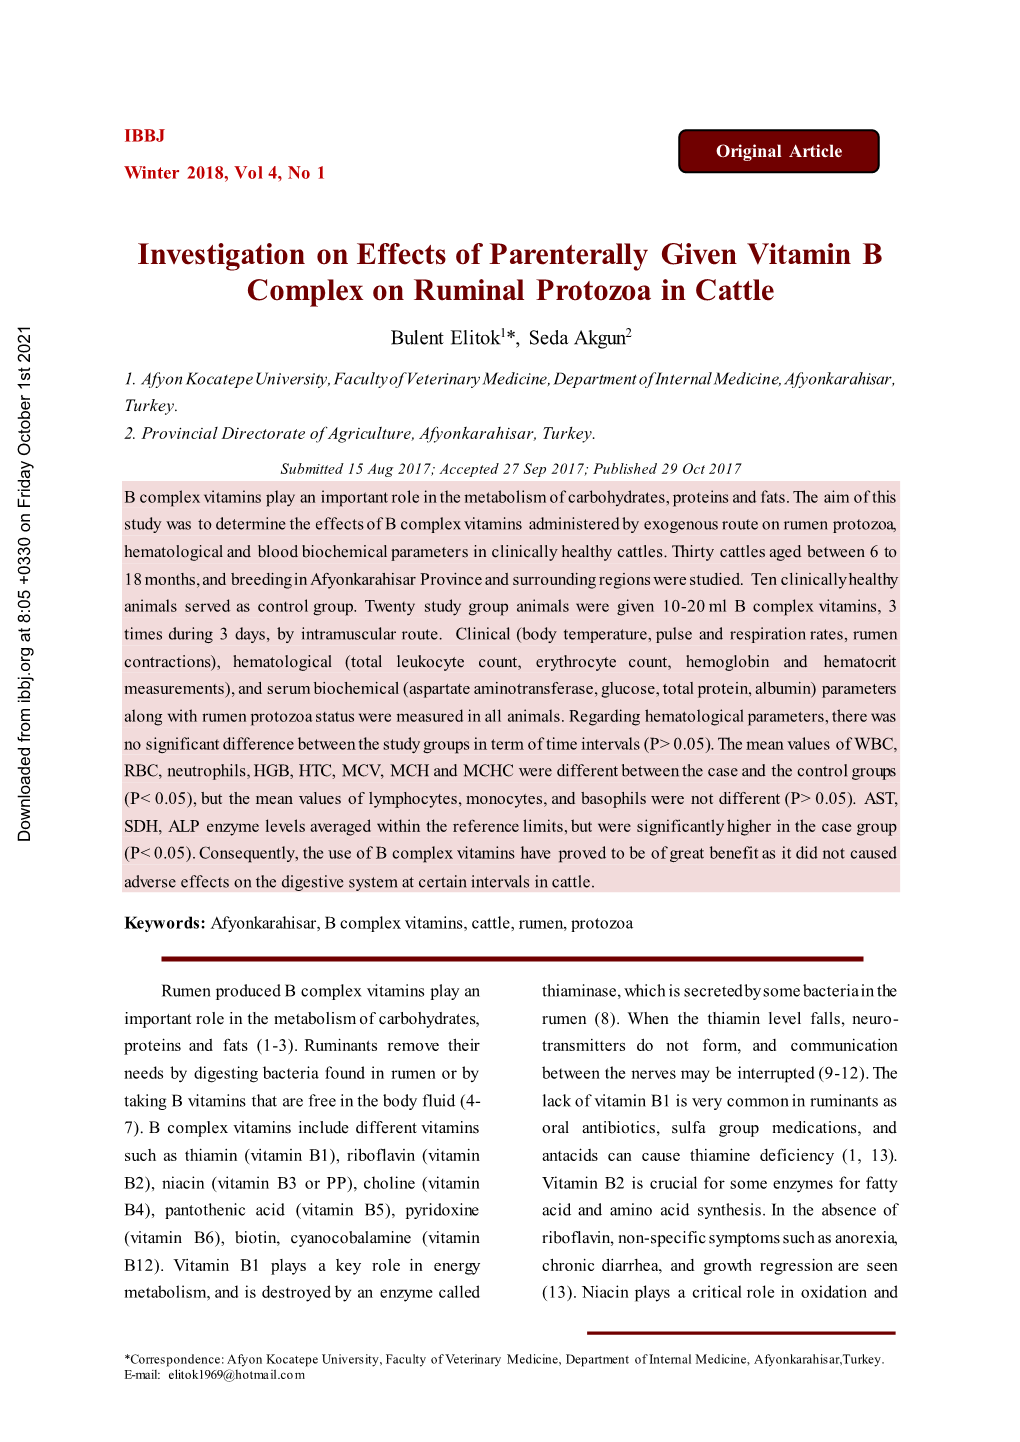 Investigation on Effects of Parenterally Given Vitamin B Complex on Ruminal Protozoa in Cattle